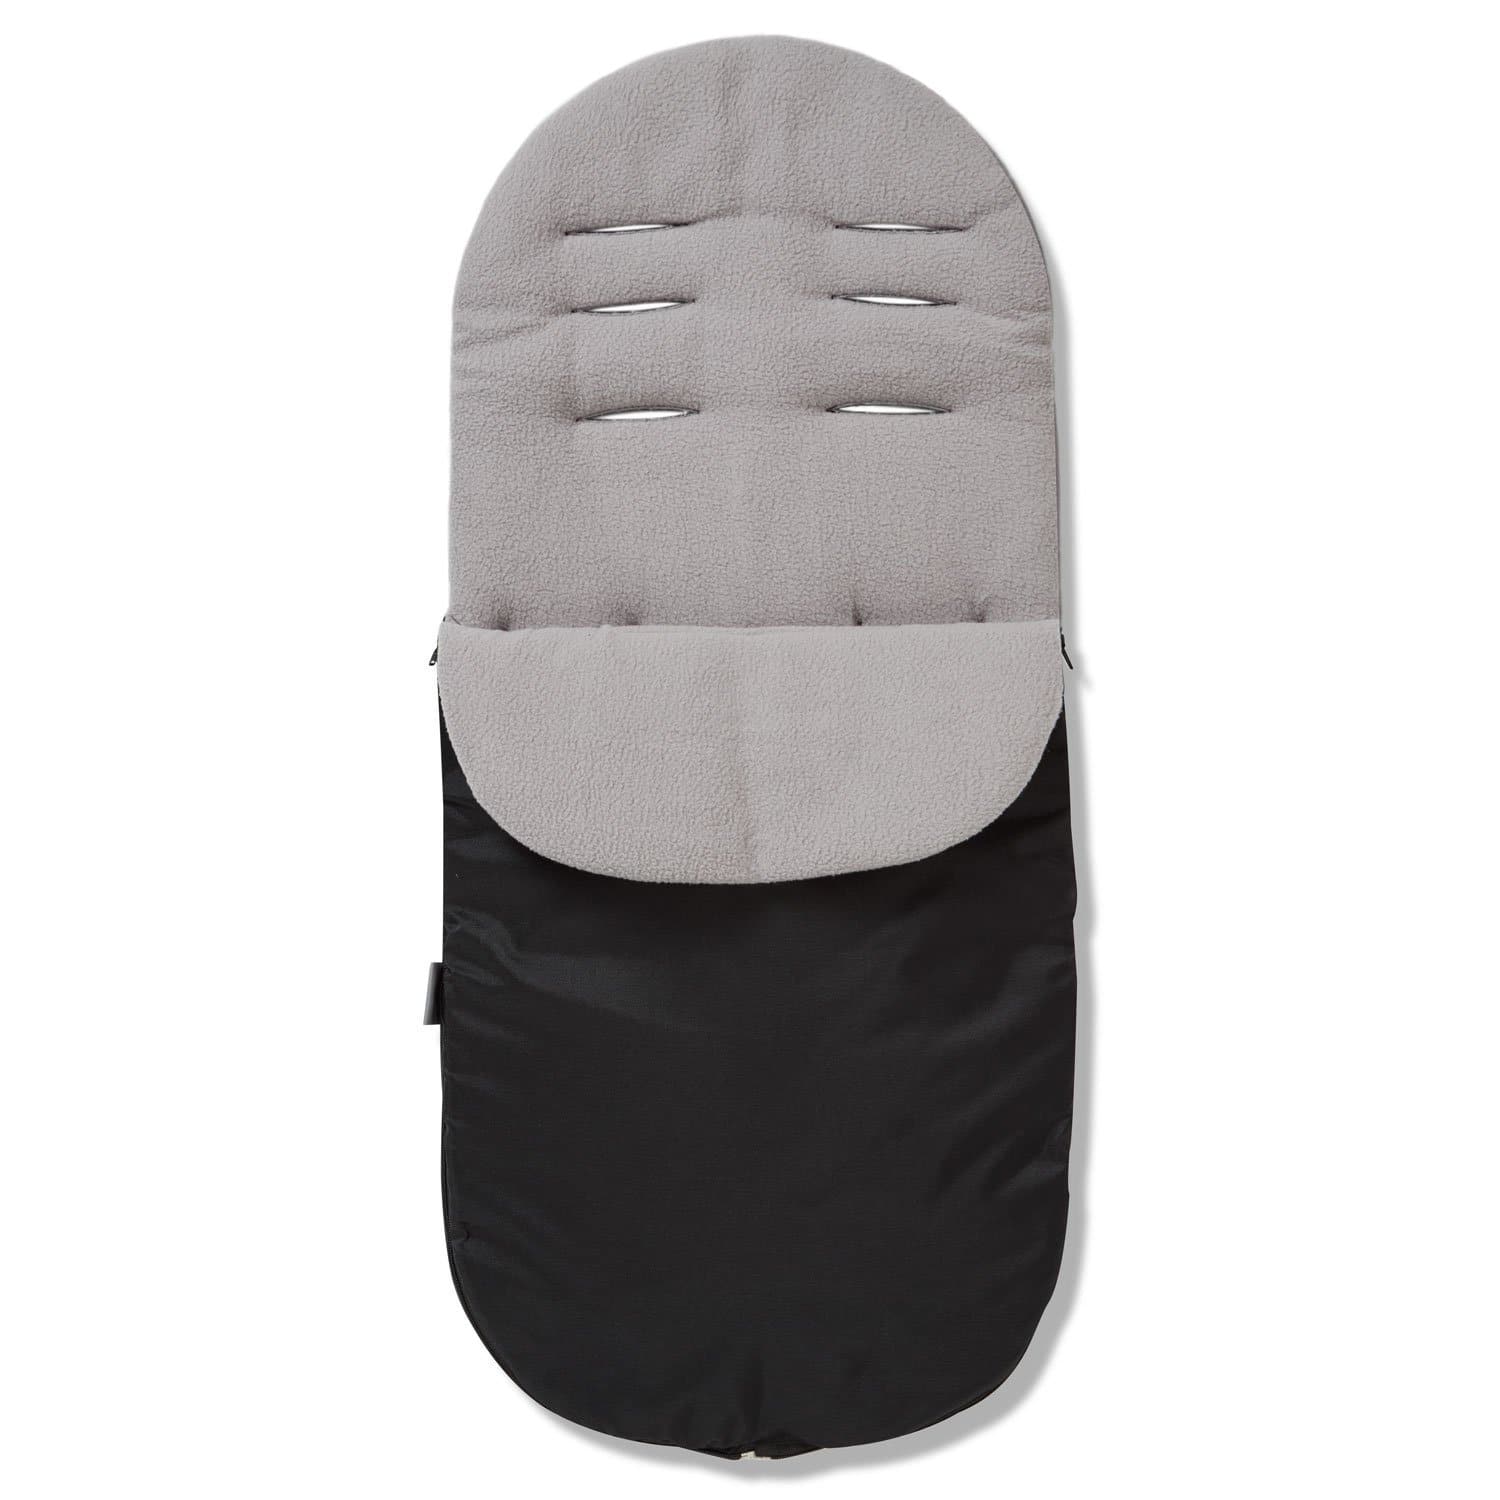 Footmuff / Cosy Toes Compatible with Roma - Grey / Fits All Models | For Your Little One